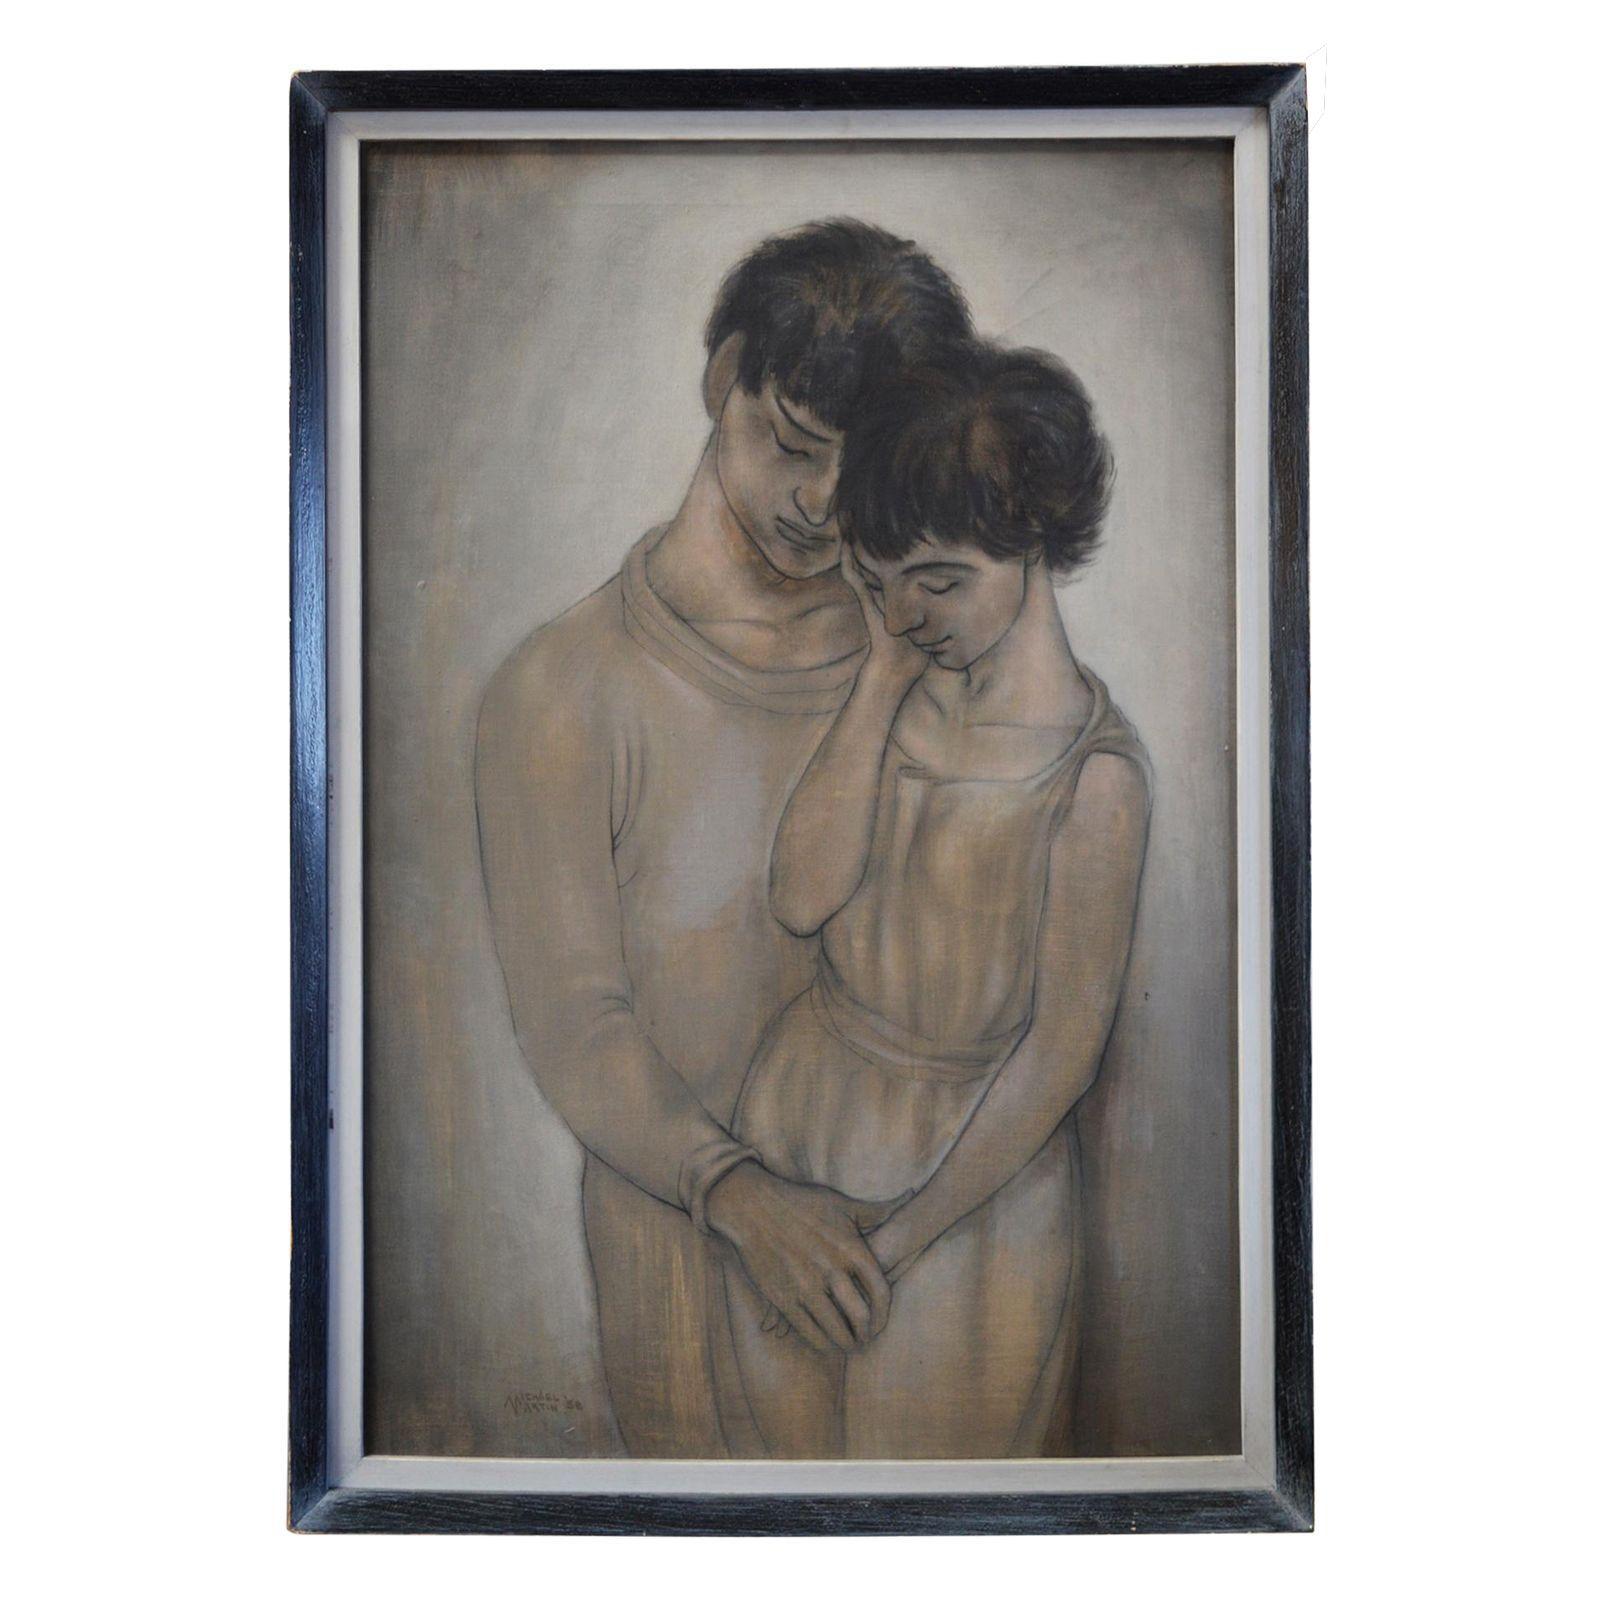 This romantic feeling oil painting of two young lovers is finished in thin washes of earth tones. Signed 